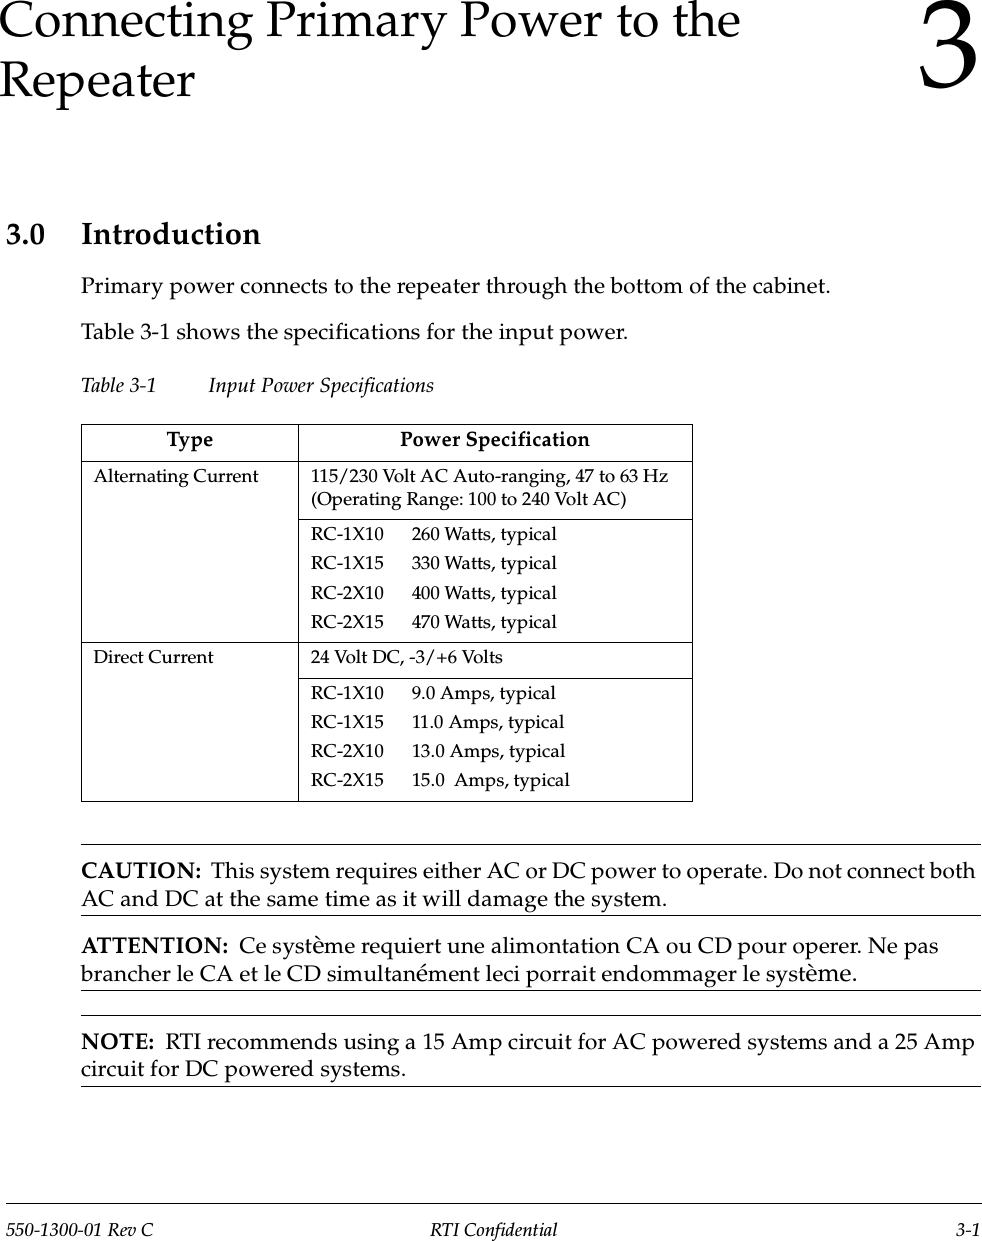 550-1300-01 Rev C RTI Confidential 3-13Connecting Primary Power to the Repeater3.0 IntroductionPrimary power connects to the repeater through the bottom of the cabinet.Table 3-1 shows the specifications for the input power.Table 3-1 Input Power SpecificationsCAUTION:  This system requires either AC or DC power to operate. Do not connect both AC and DC at the same time as it will damage the system.ATTENTION:  Ce système requiert une alimontation CA ou CD pour operer. Ne pas brancher le CA et le CD simultanément leci porrait endommager le système.NOTE:  RTI recommends using a 15 Amp circuit for AC powered systems and a 25 Amp circuit for DC powered systems.Type Power SpecificationAlternating Current 115/230 Volt AC Auto-ranging, 47 to 63 Hz (Operating Range: 100 to 240 Volt AC)RC-1X10      260 Watts, typicalRC-1X15      330 Watts, typicalRC-2X10      400 Watts, typicalRC-2X15      470 Watts, typicalDirect Current 24 Volt DC, -3/+6 VoltsRC-1X10      9.0 Amps, typicalRC-1X15      11.0 Amps, typicalRC-2X10      13.0 Amps, typicalRC-2X15      15.0  Amps, typical